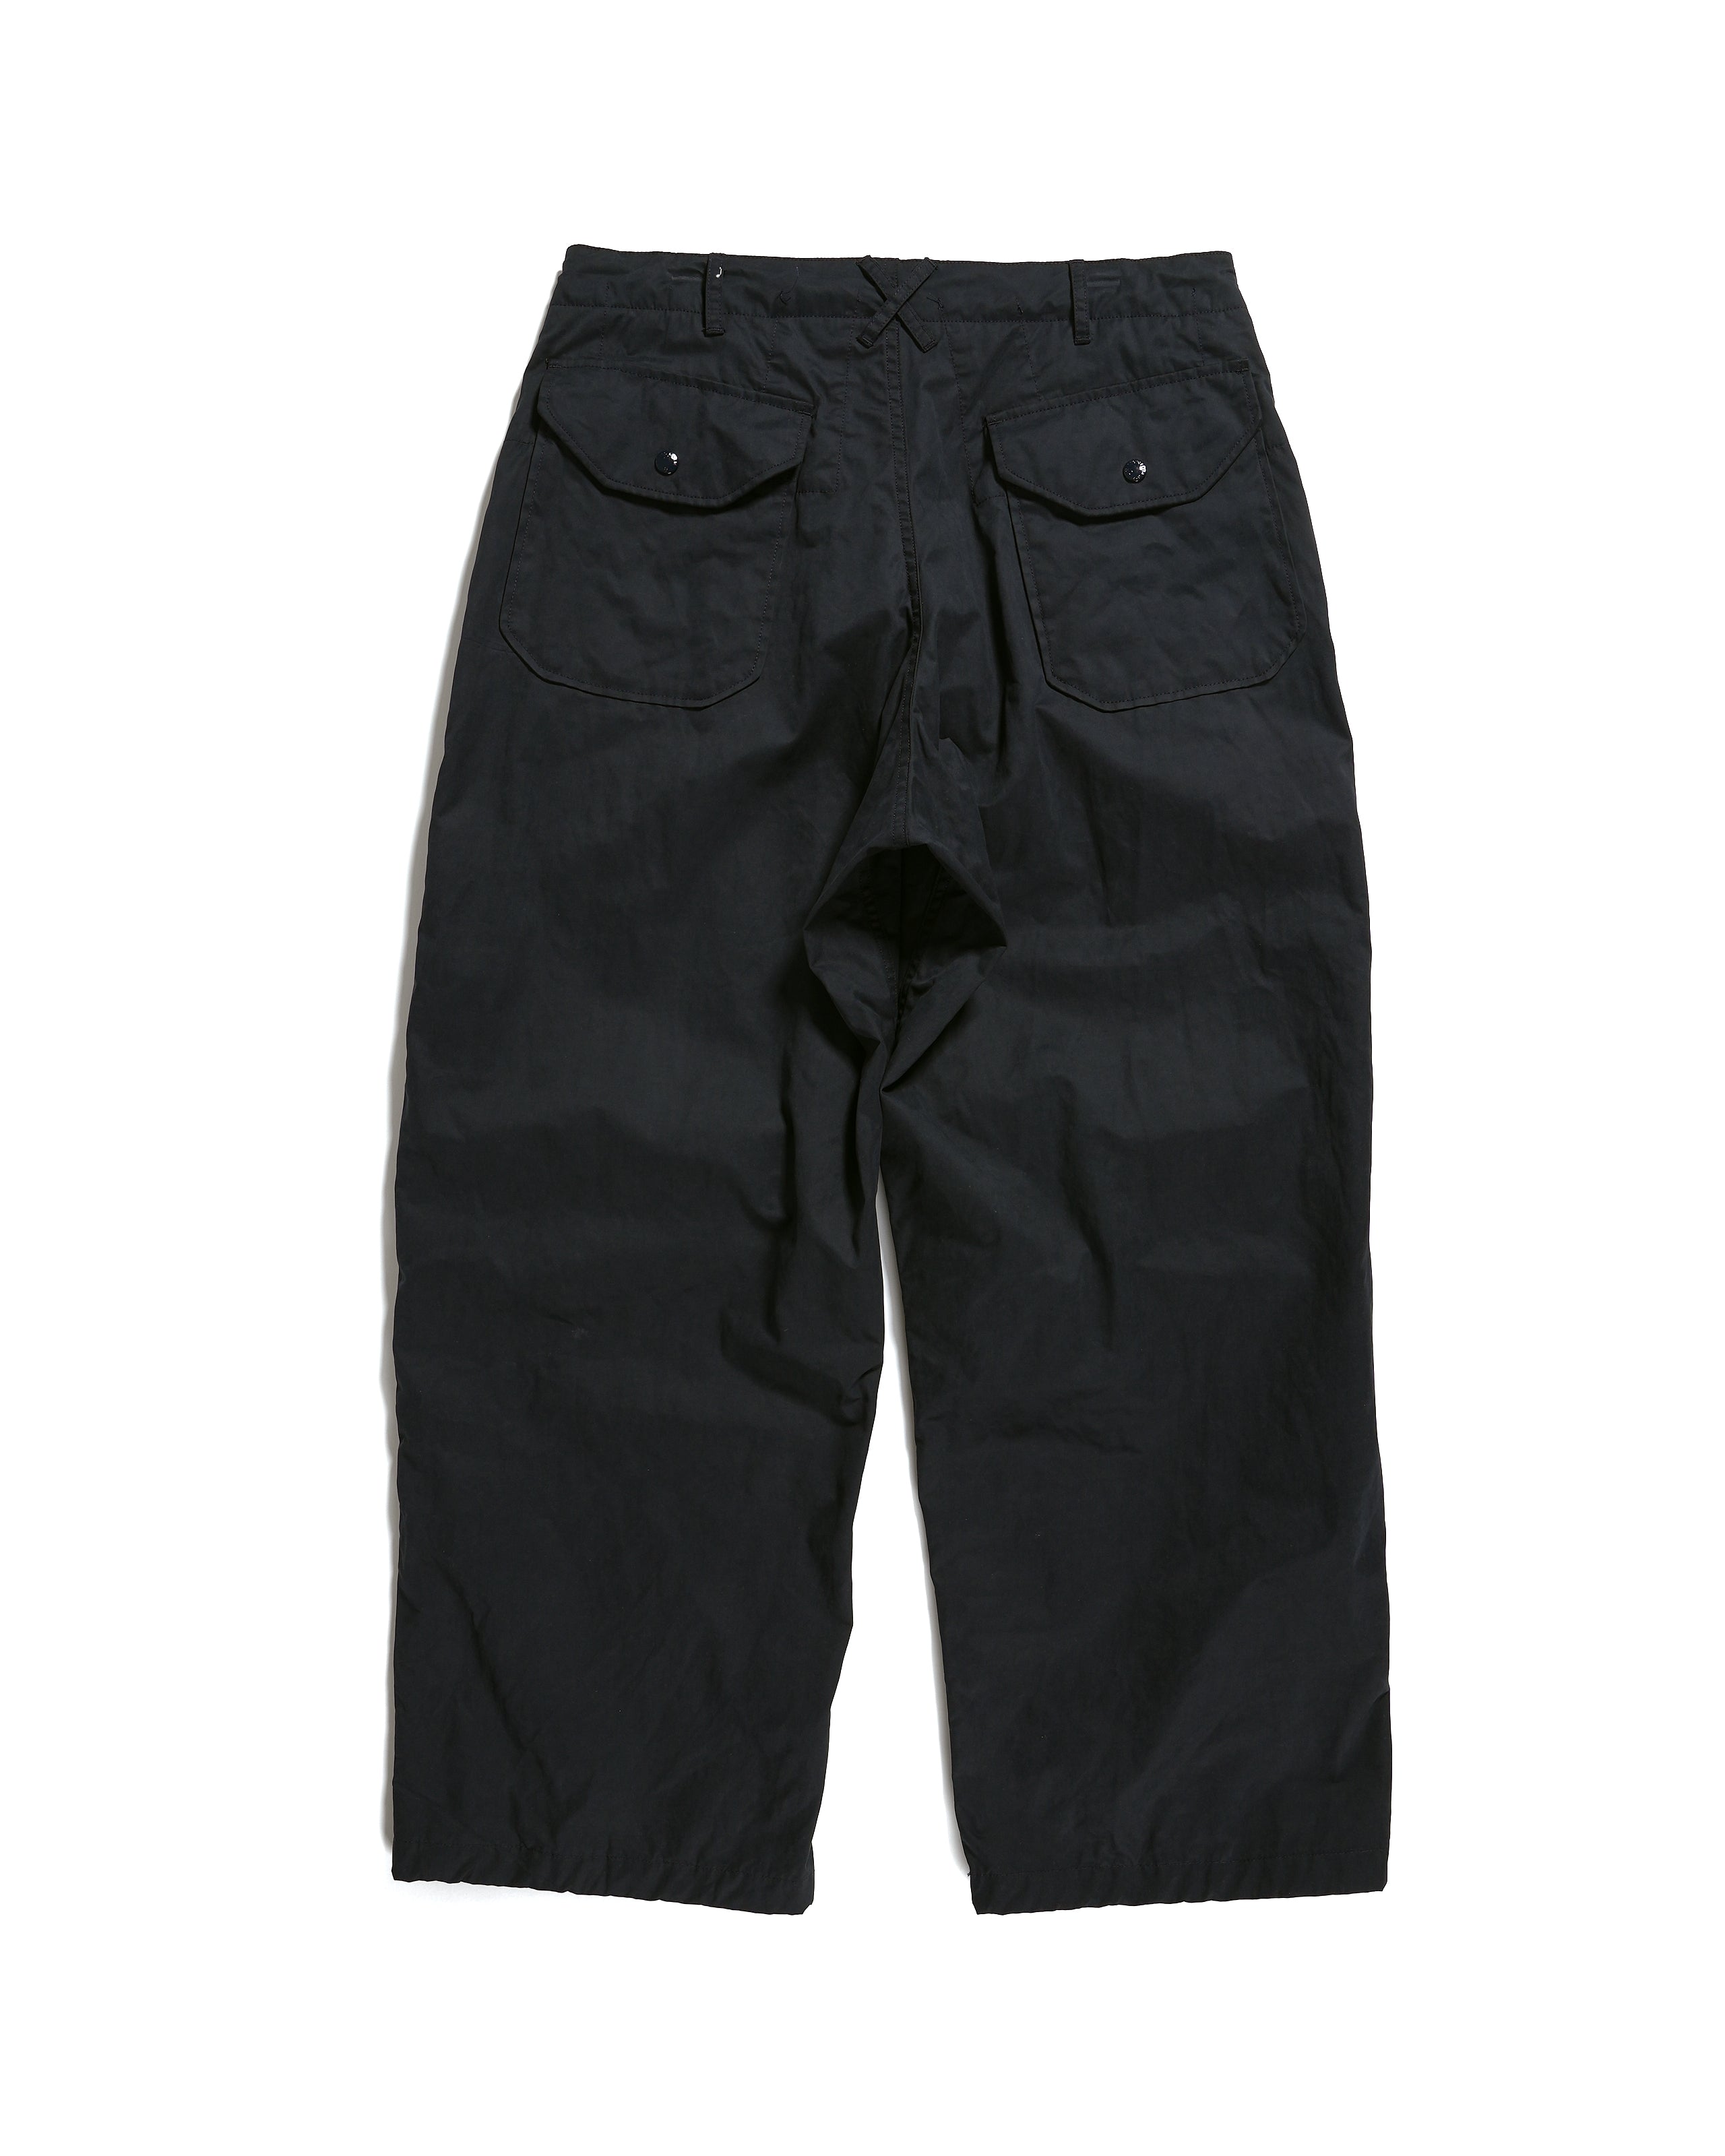 Over Pant - Dk. Navy PC Coated Cloth